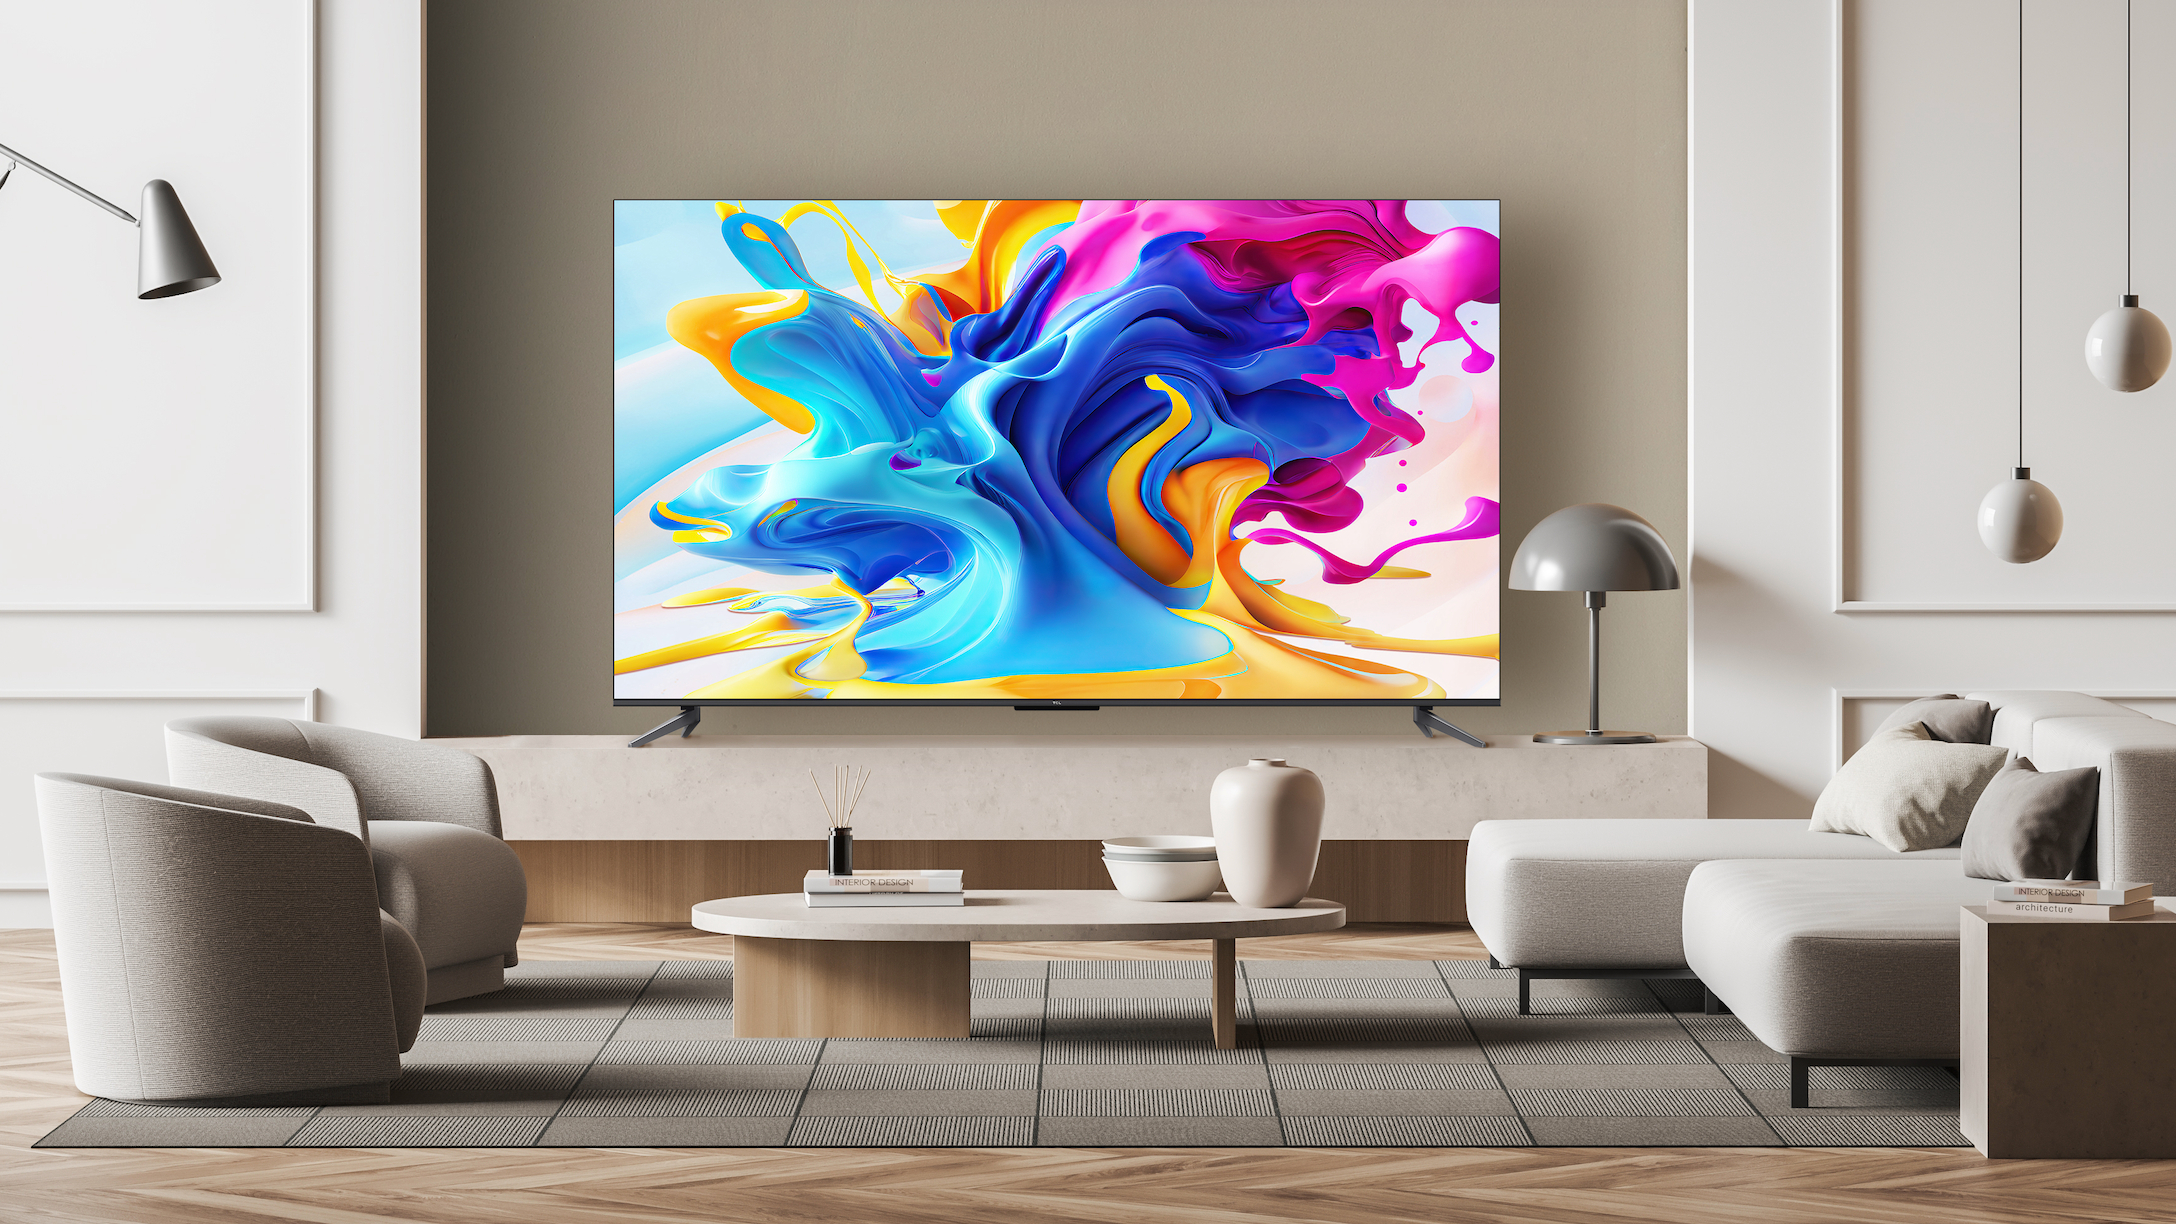 TCL C84 TV with white background showing vibrant paint colors on screen